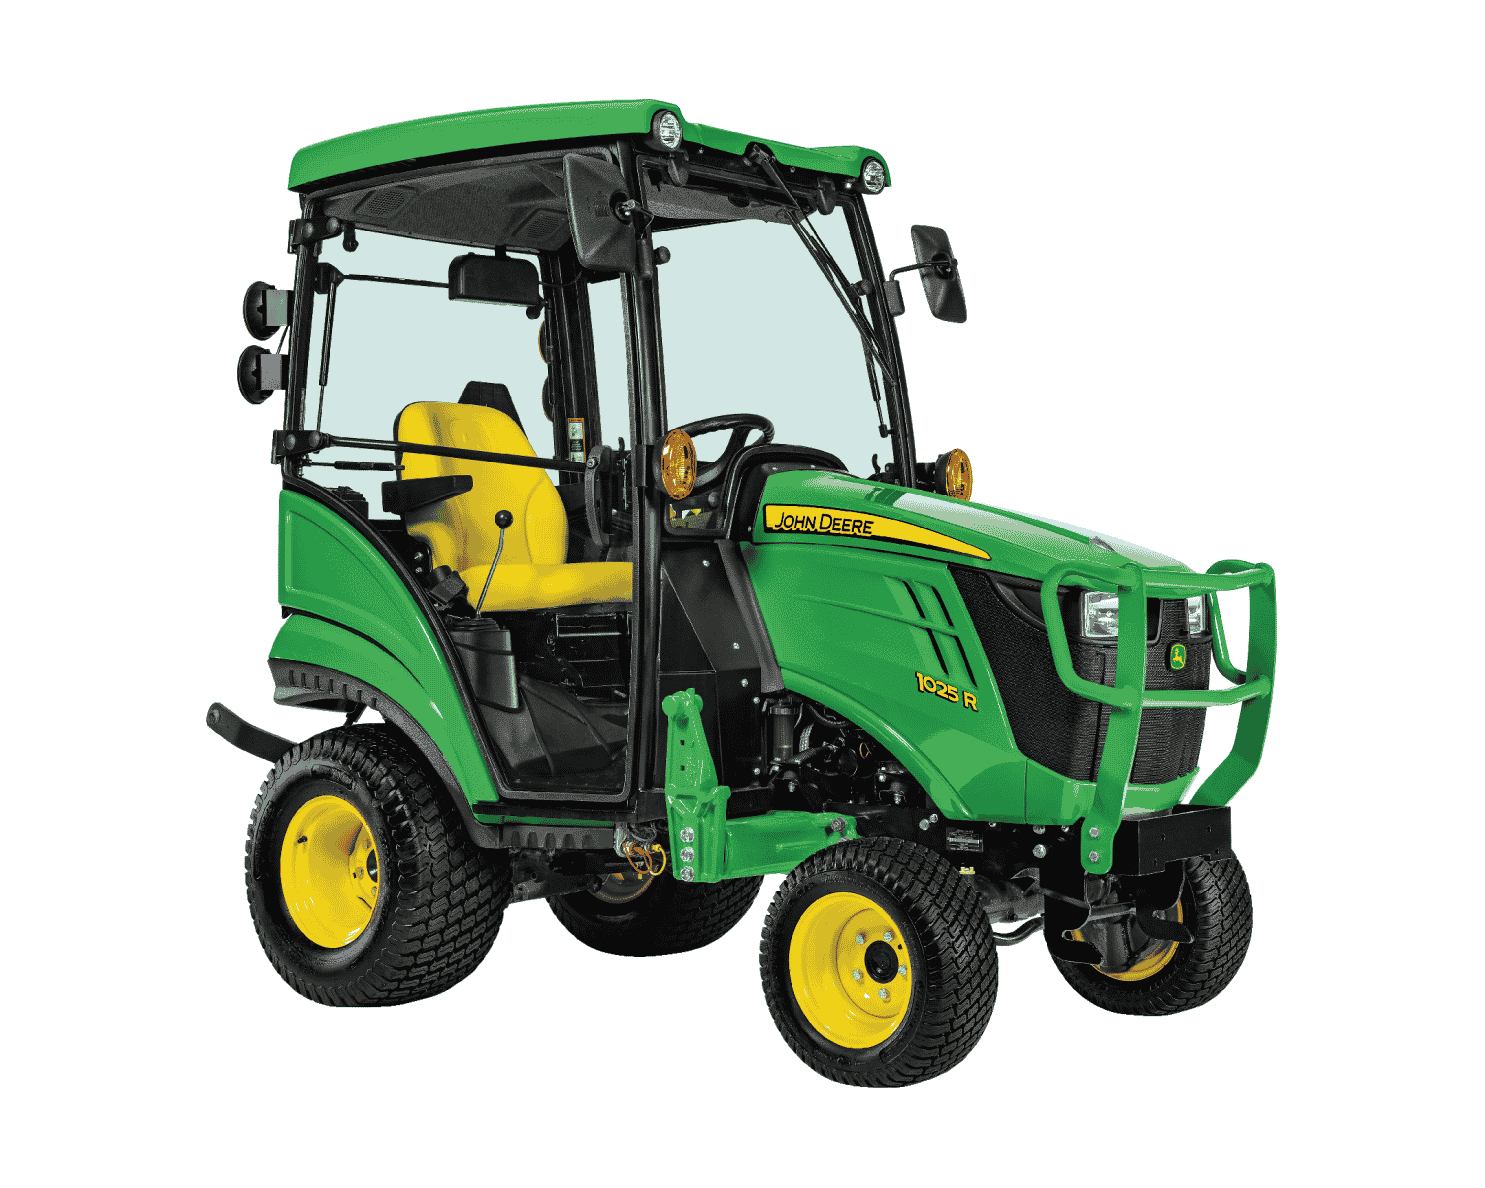 Product effect kubus John Deere 1025R Compact Tractor with Cab - Minnesota Equipment